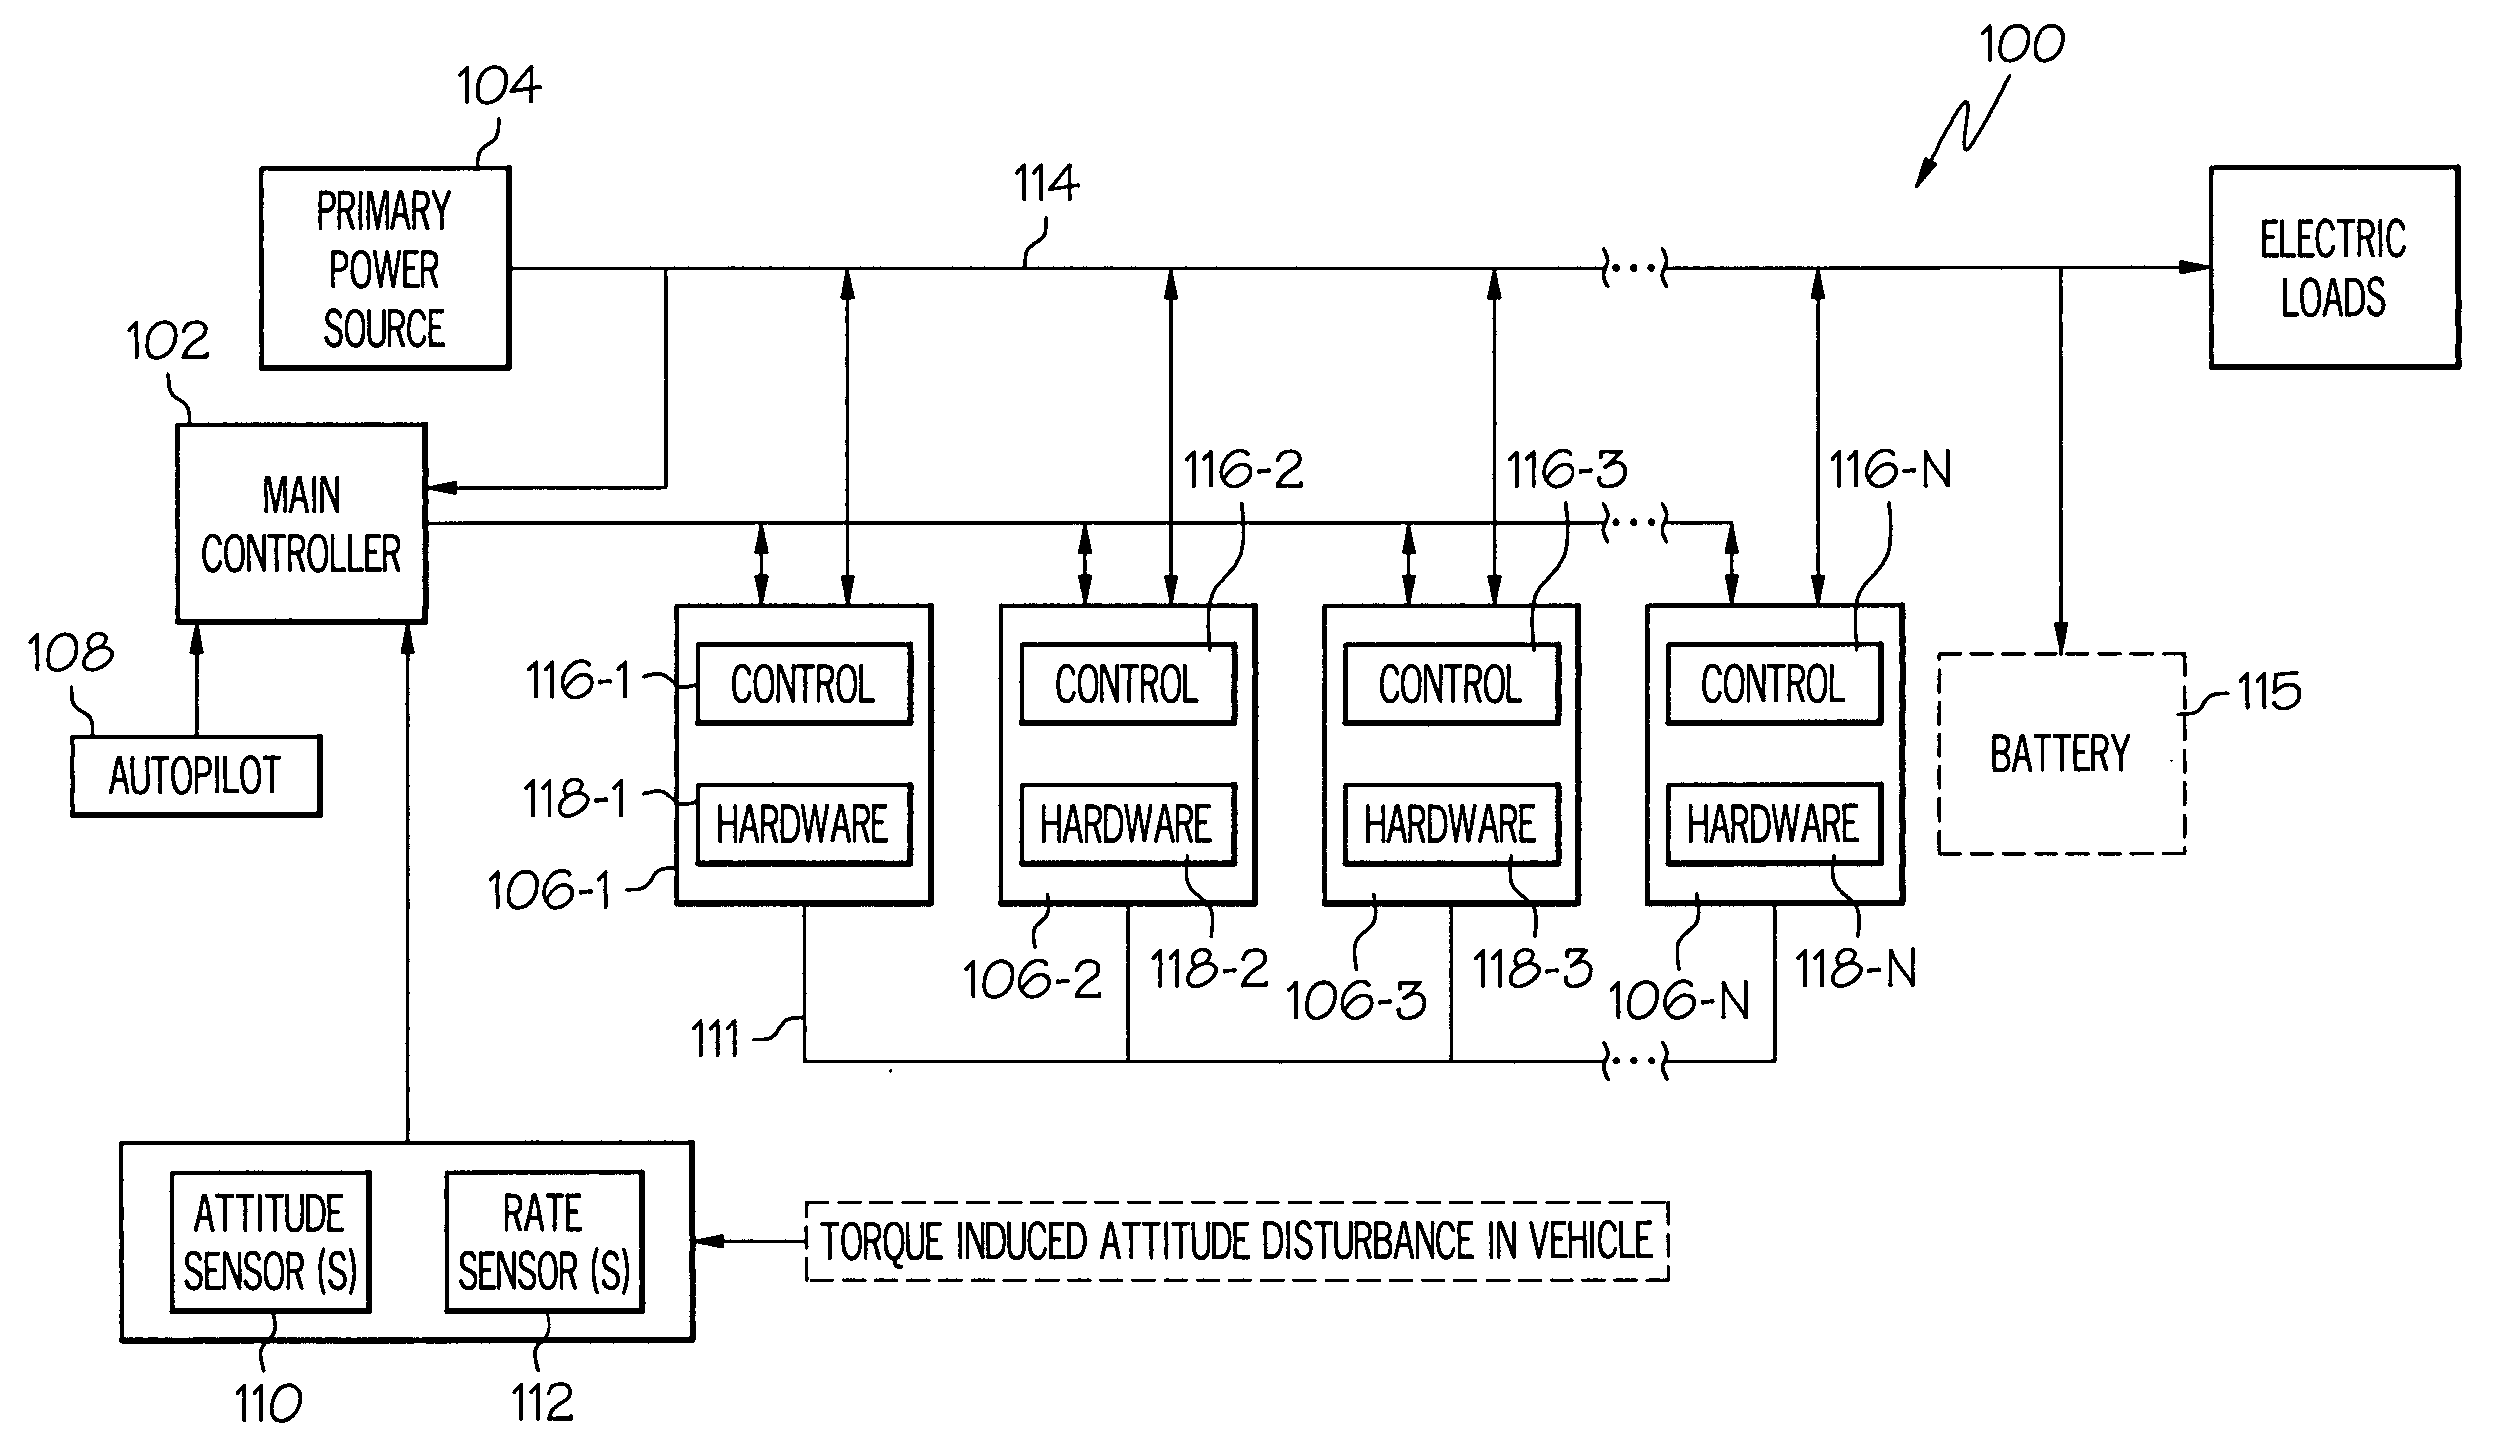 Energy storage flywheel voltage regulation and load sharing system and method